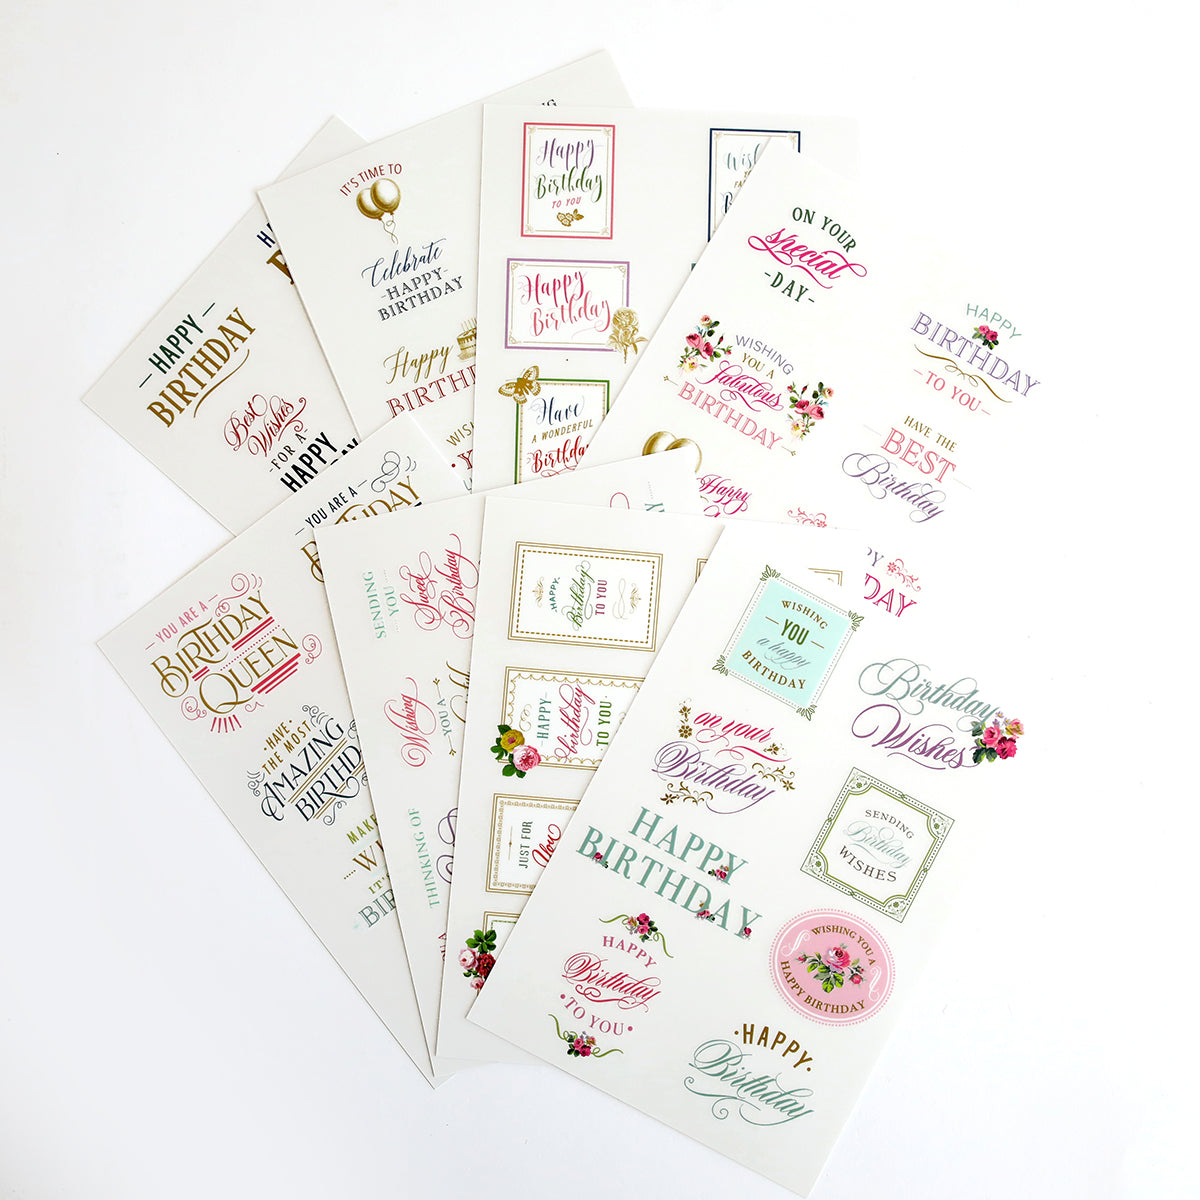 An array of assorted birthday cards featuring various designs, Birthday Sentiment Rub Ons, and typography styles displayed on a white background.